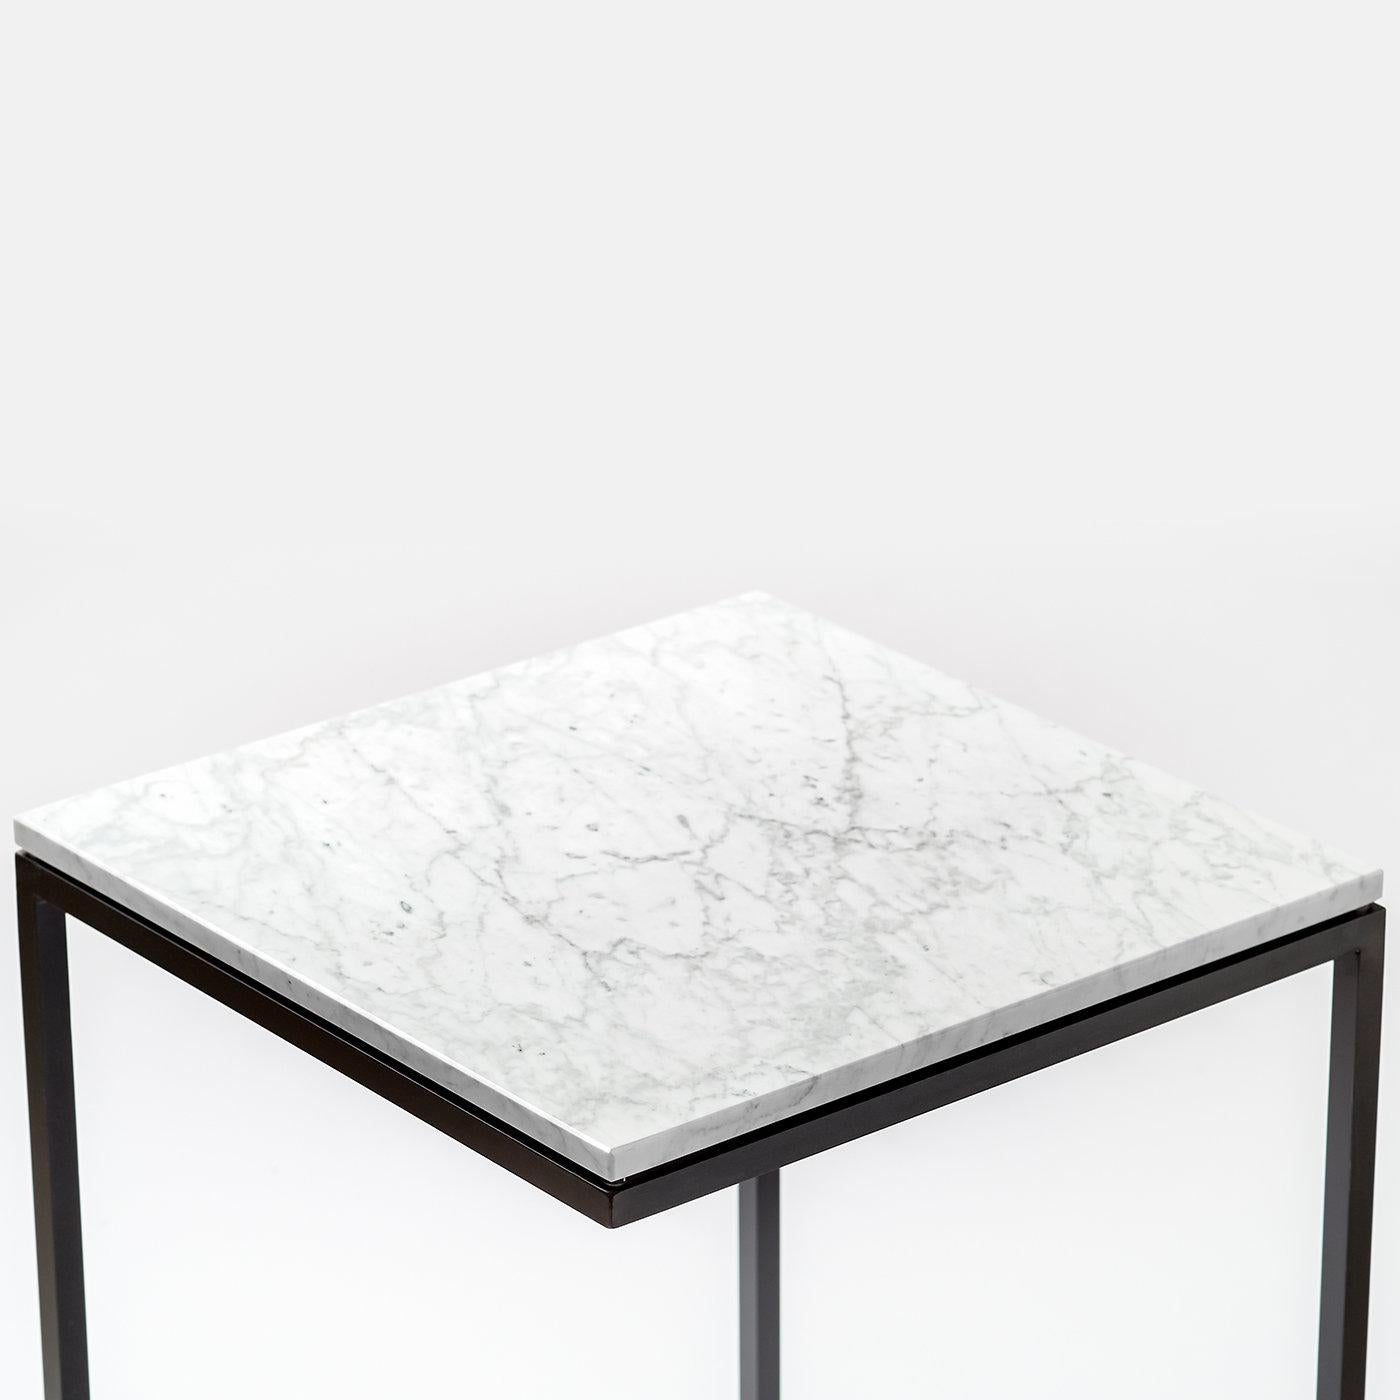 A clean and essential design that combines refined traditional craftsmanship with an exceptional contemporary flair, this magnificent side table will make a visually striking addition in both a home living room or lounge and contract areas. Designed